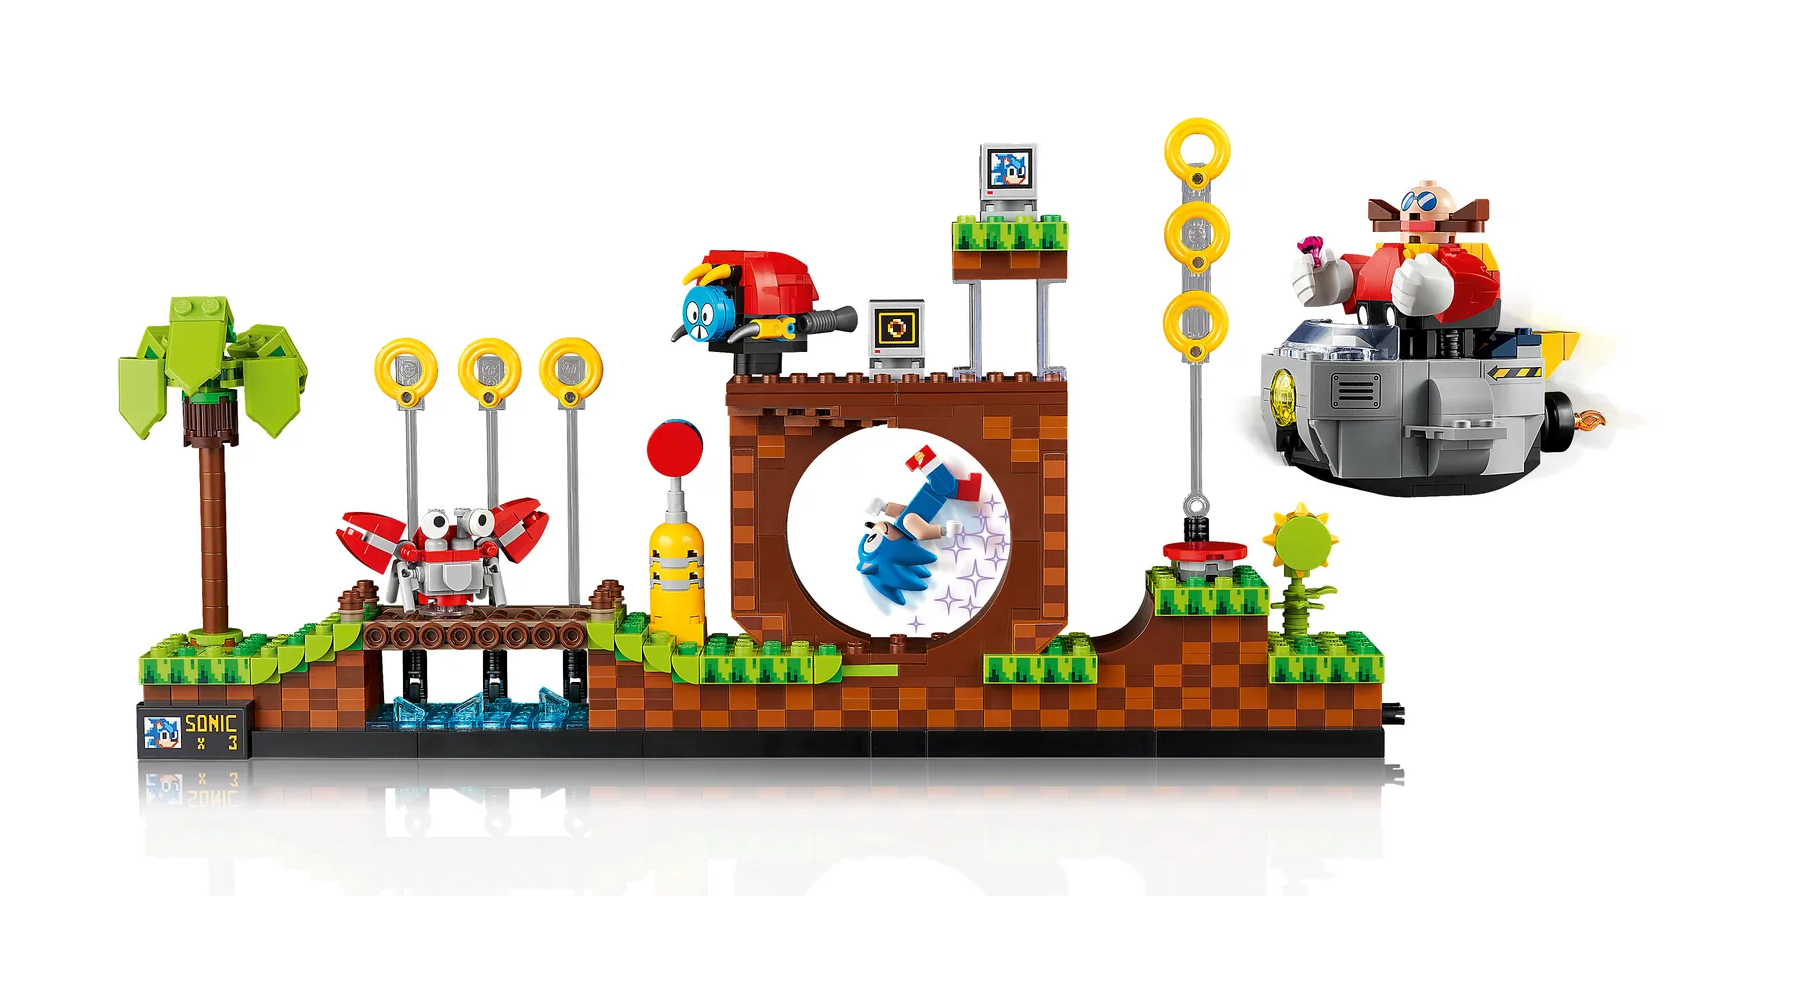 LEGO Sonic the Hedgehog Sets - Official Announcement Trailer 